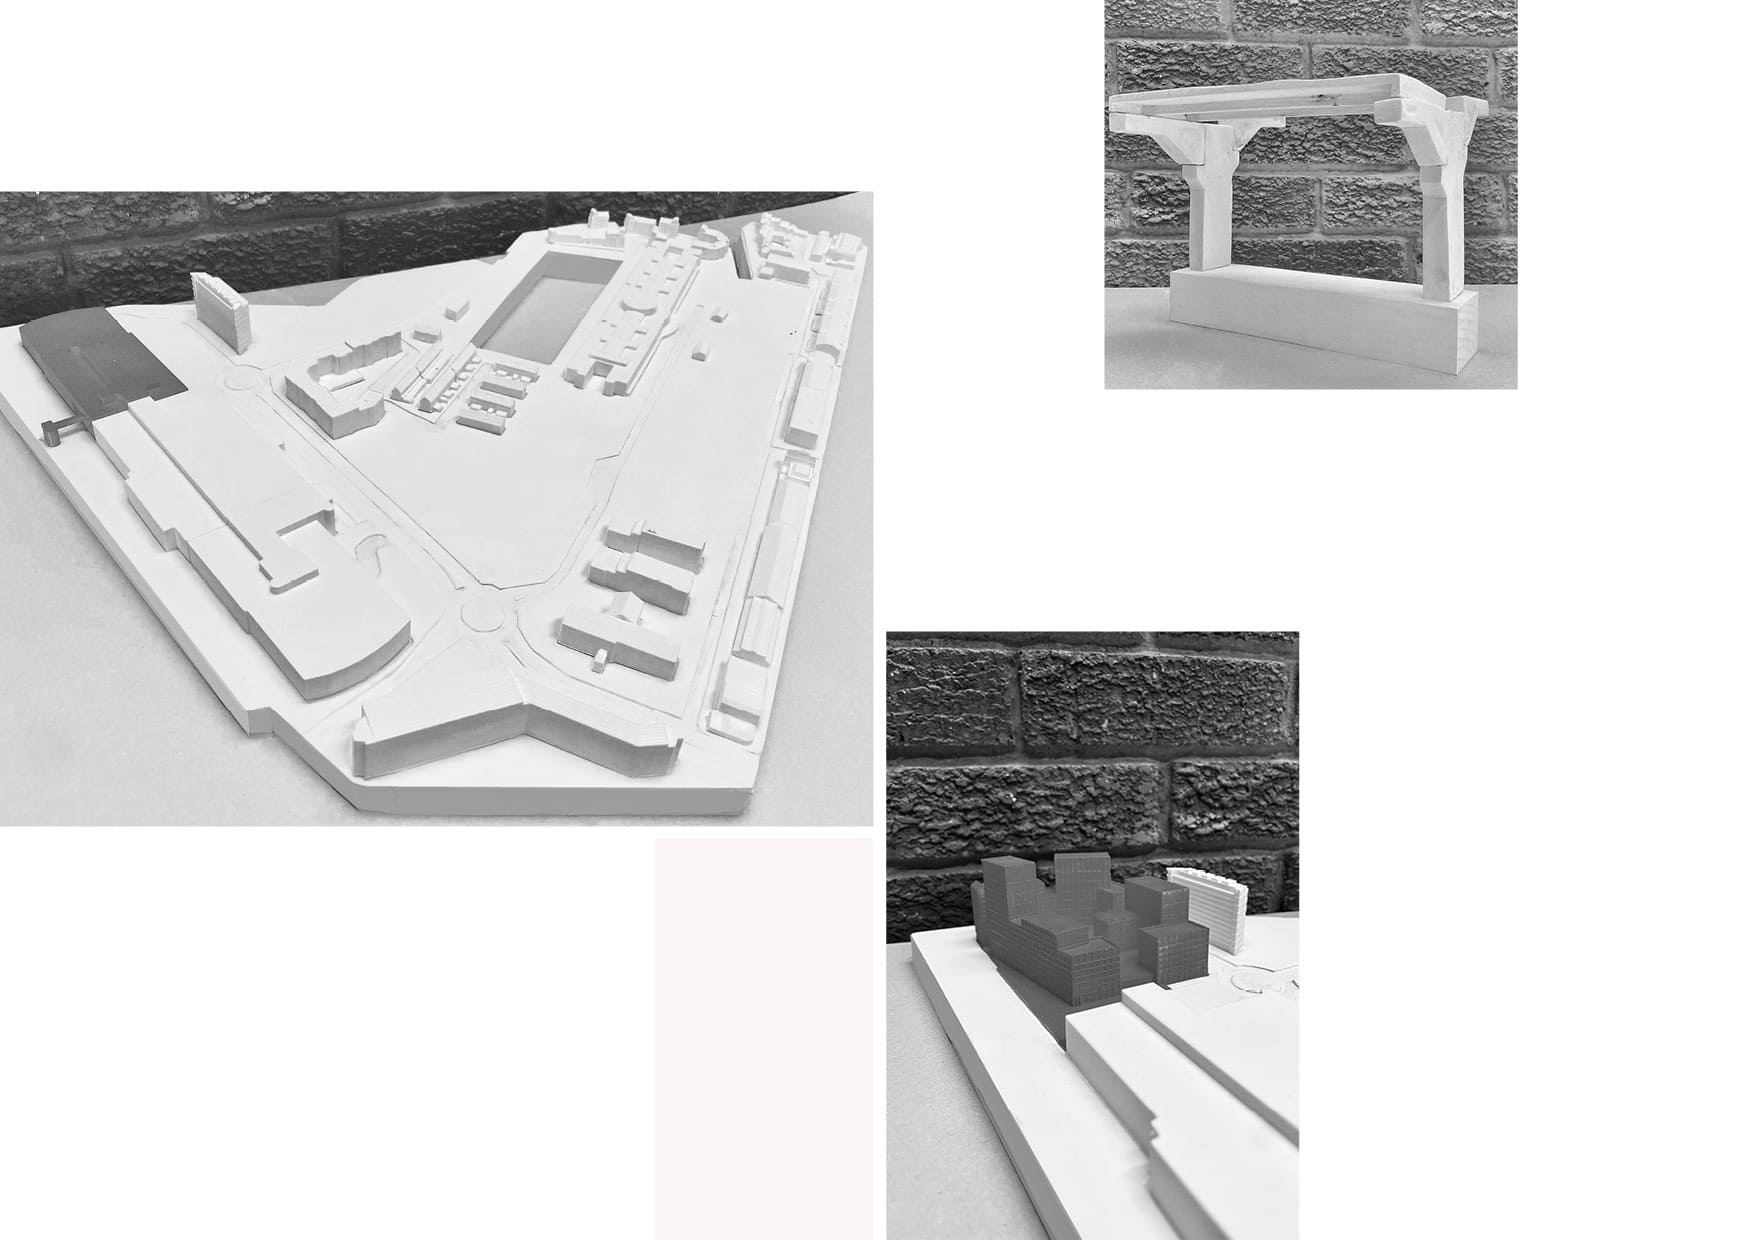 [Left to Right] 1. Site model, the area marked for demolition in ‘red/black’. 2. A study of the carpark build-up, a meeting of timber and plaster. 3. The proposed alteration following the current buildings demolition.